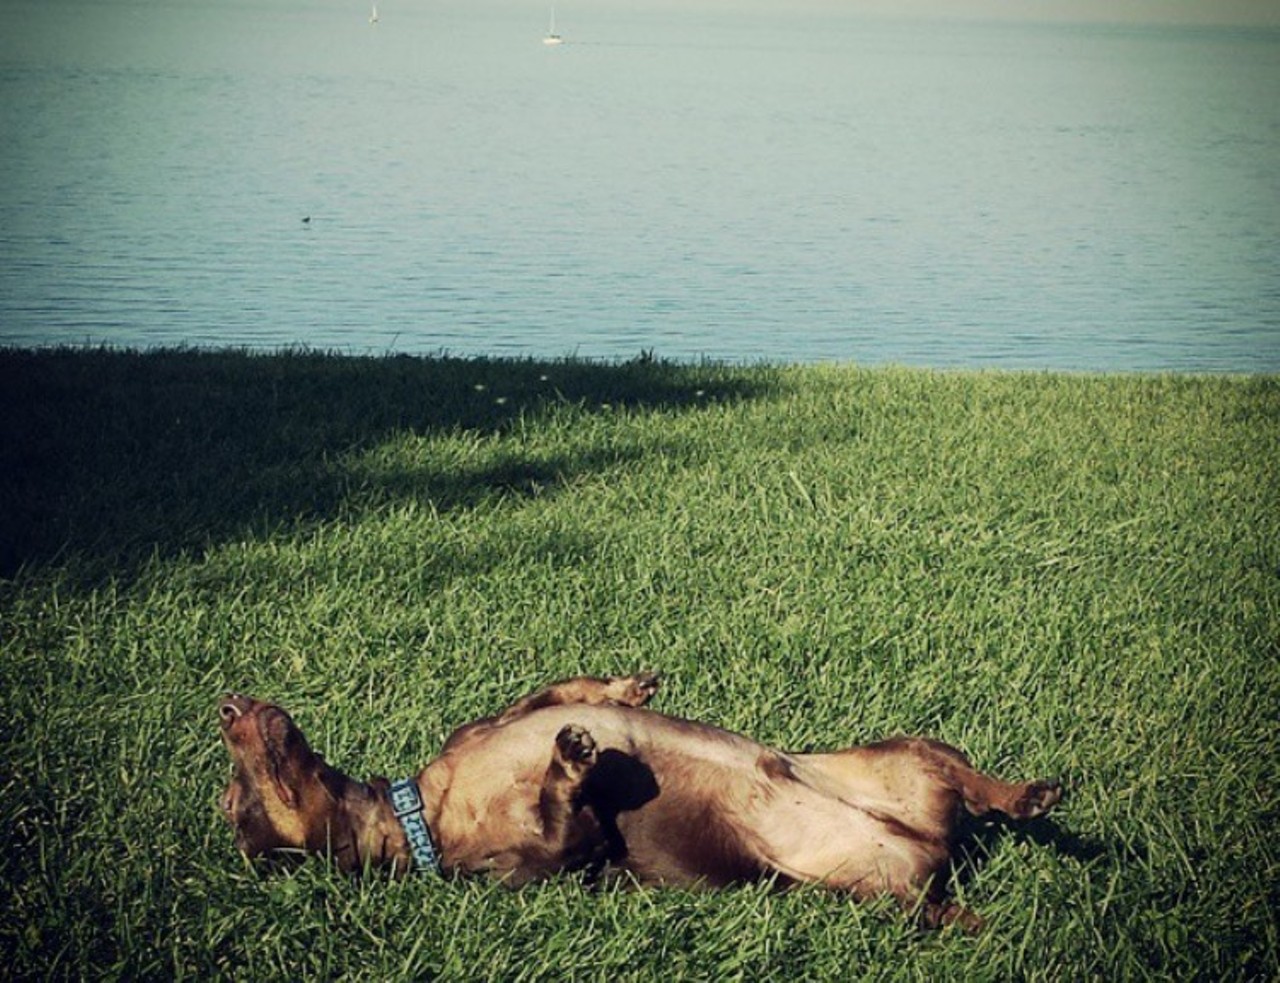 Edgewater Park
Cleveland Memorial Shoreway 
This westside beachfront is a great park for you and your pup to enjoy the outdoors.
(Photo courtesy of  Instagram user: Vincenzo32)